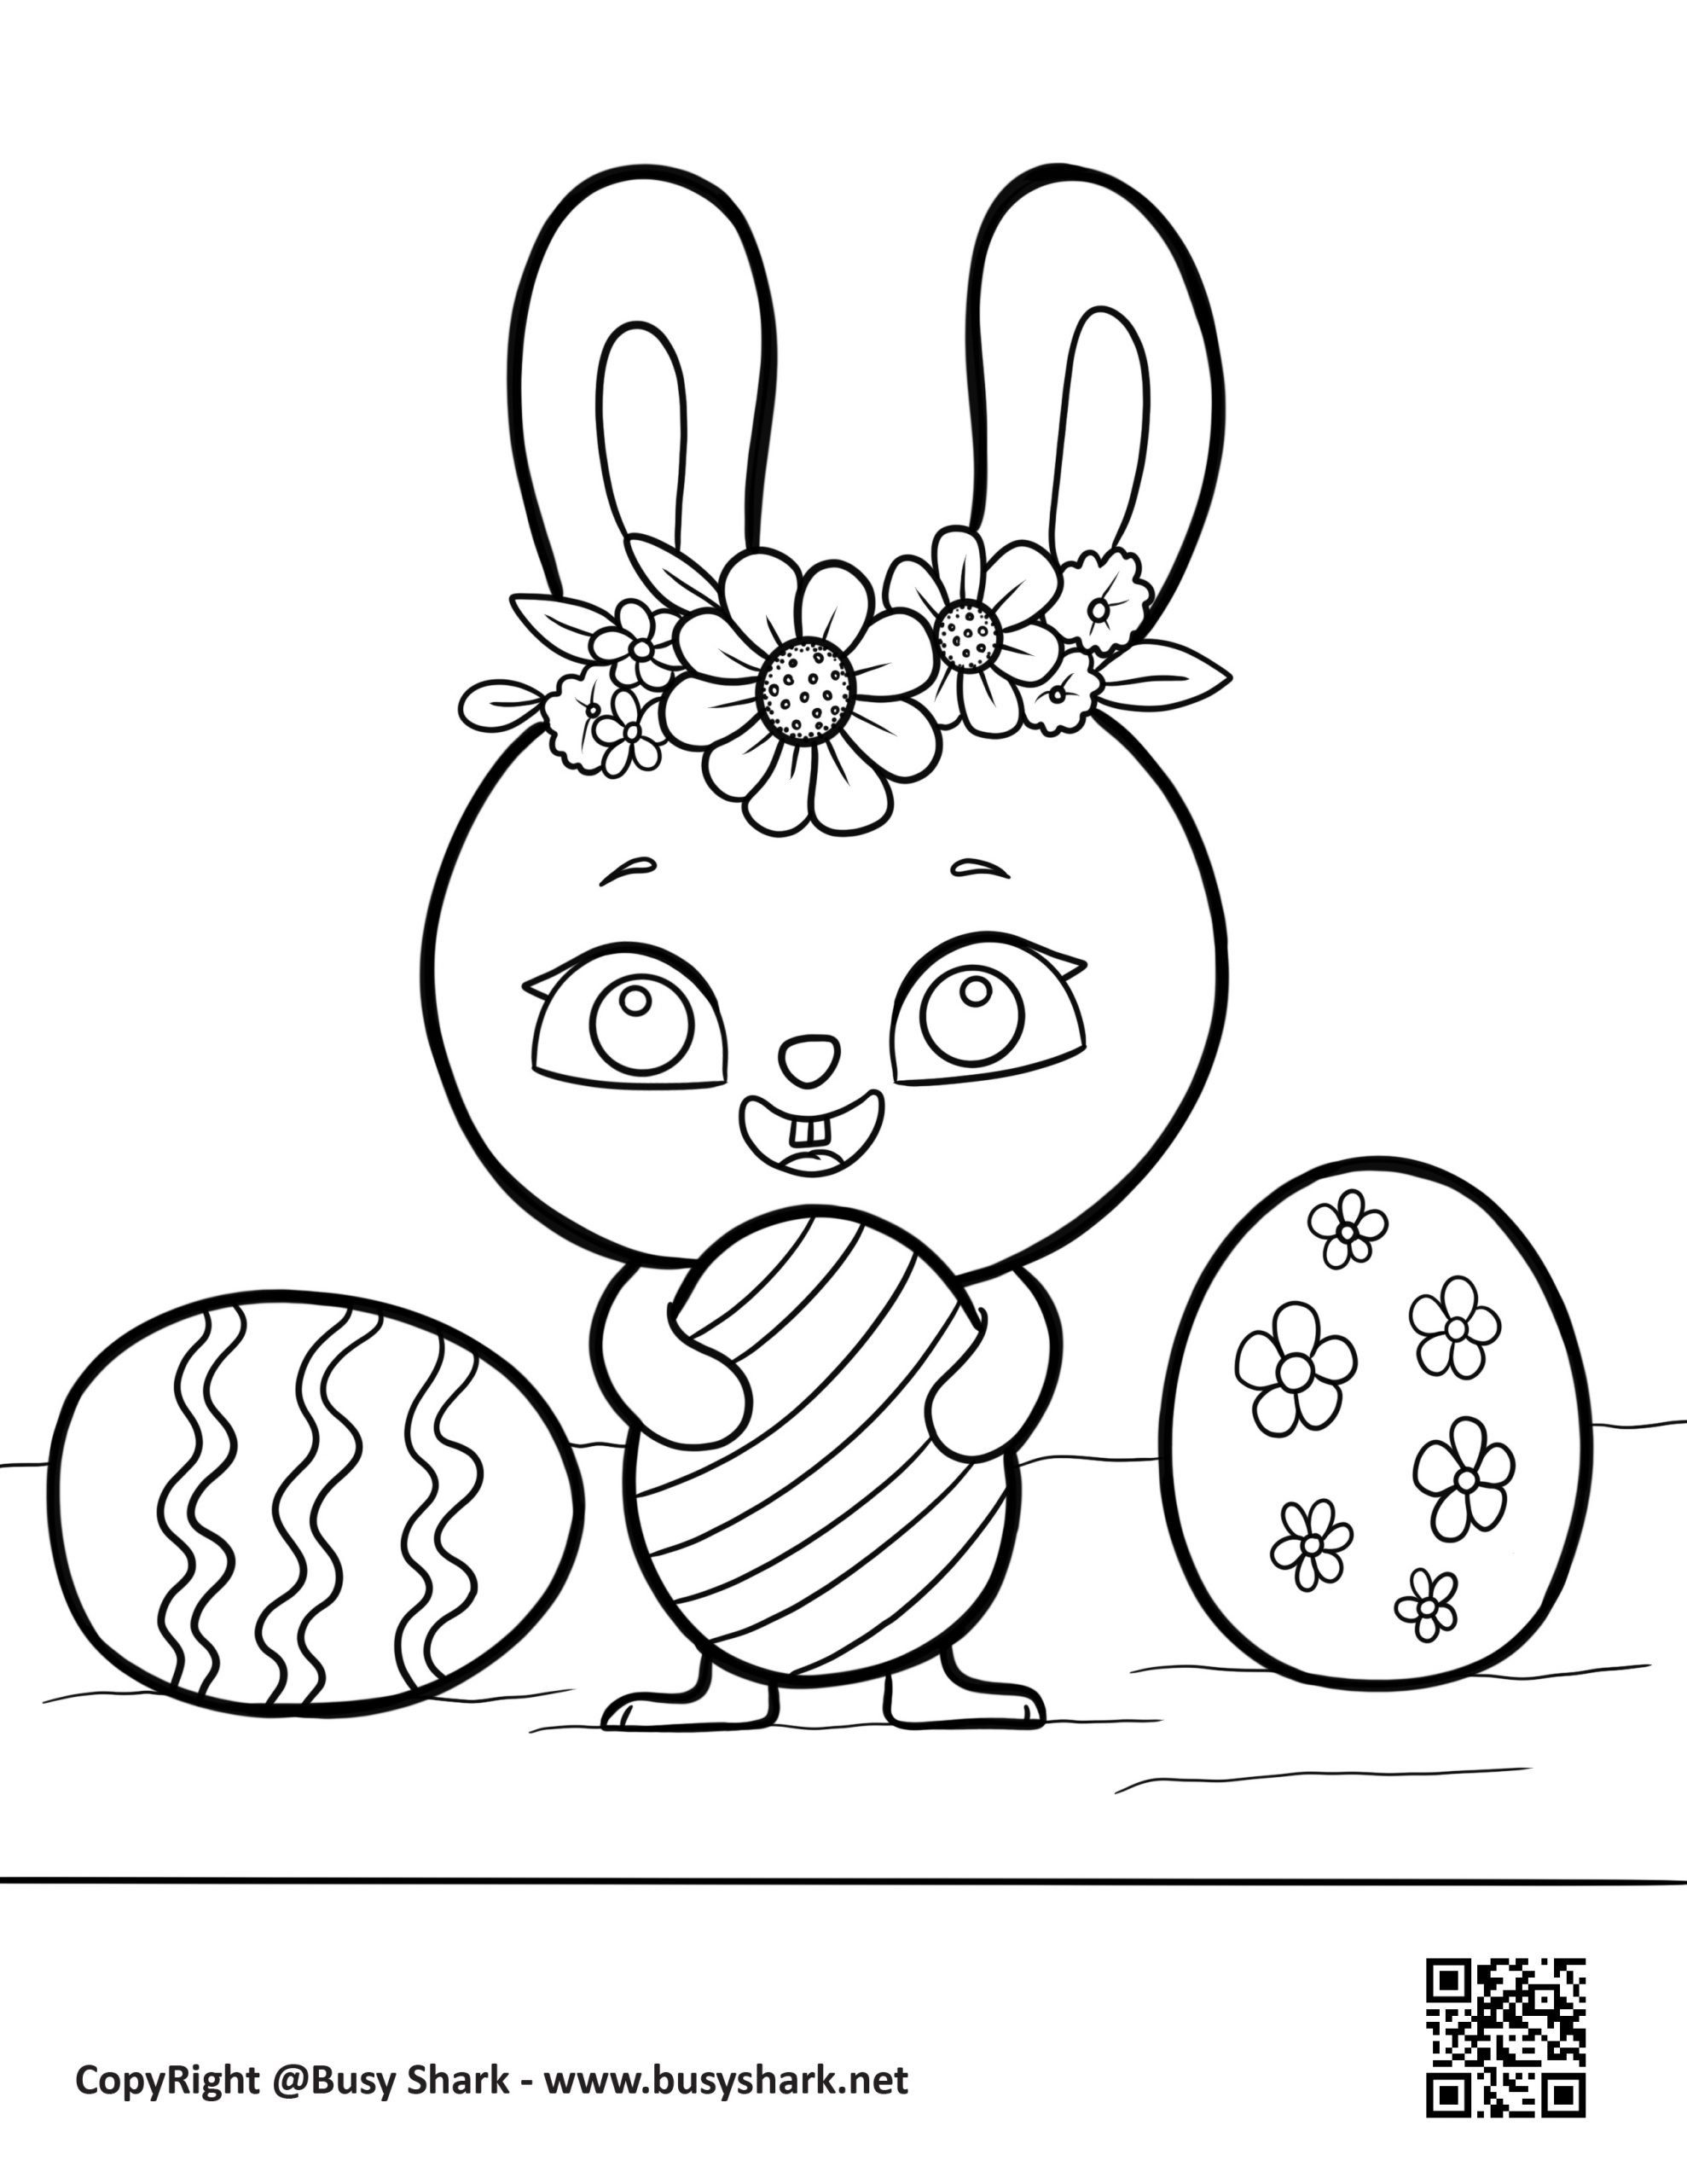 Easter bunny with eggs coloring page free printable